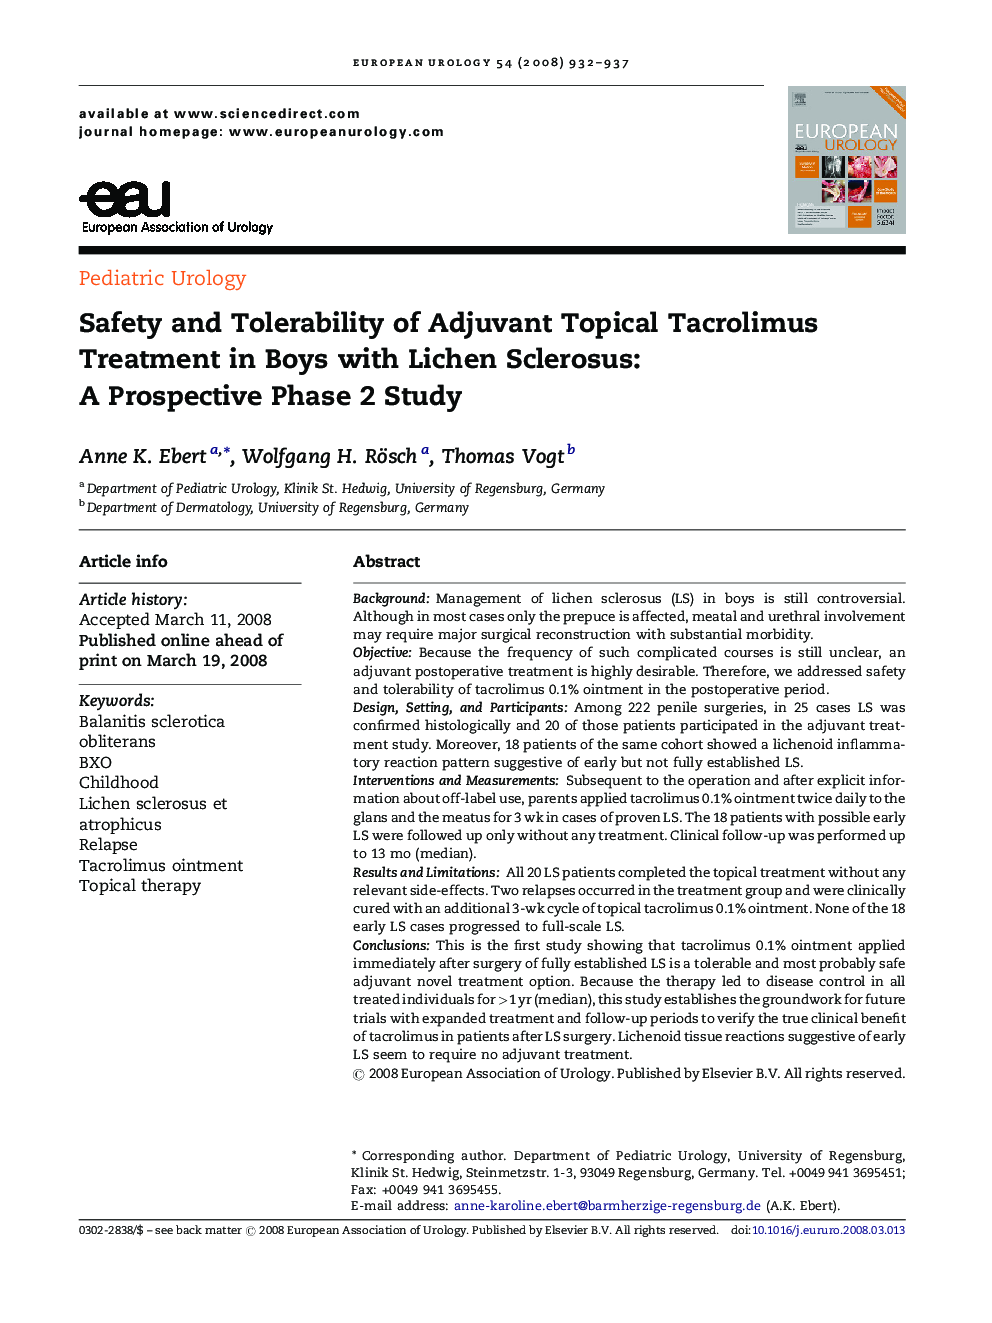 Safety and Tolerability of Adjuvant Topical Tacrolimus Treatment in Boys with Lichen Sclerosus: A Prospective Phase 2 Study